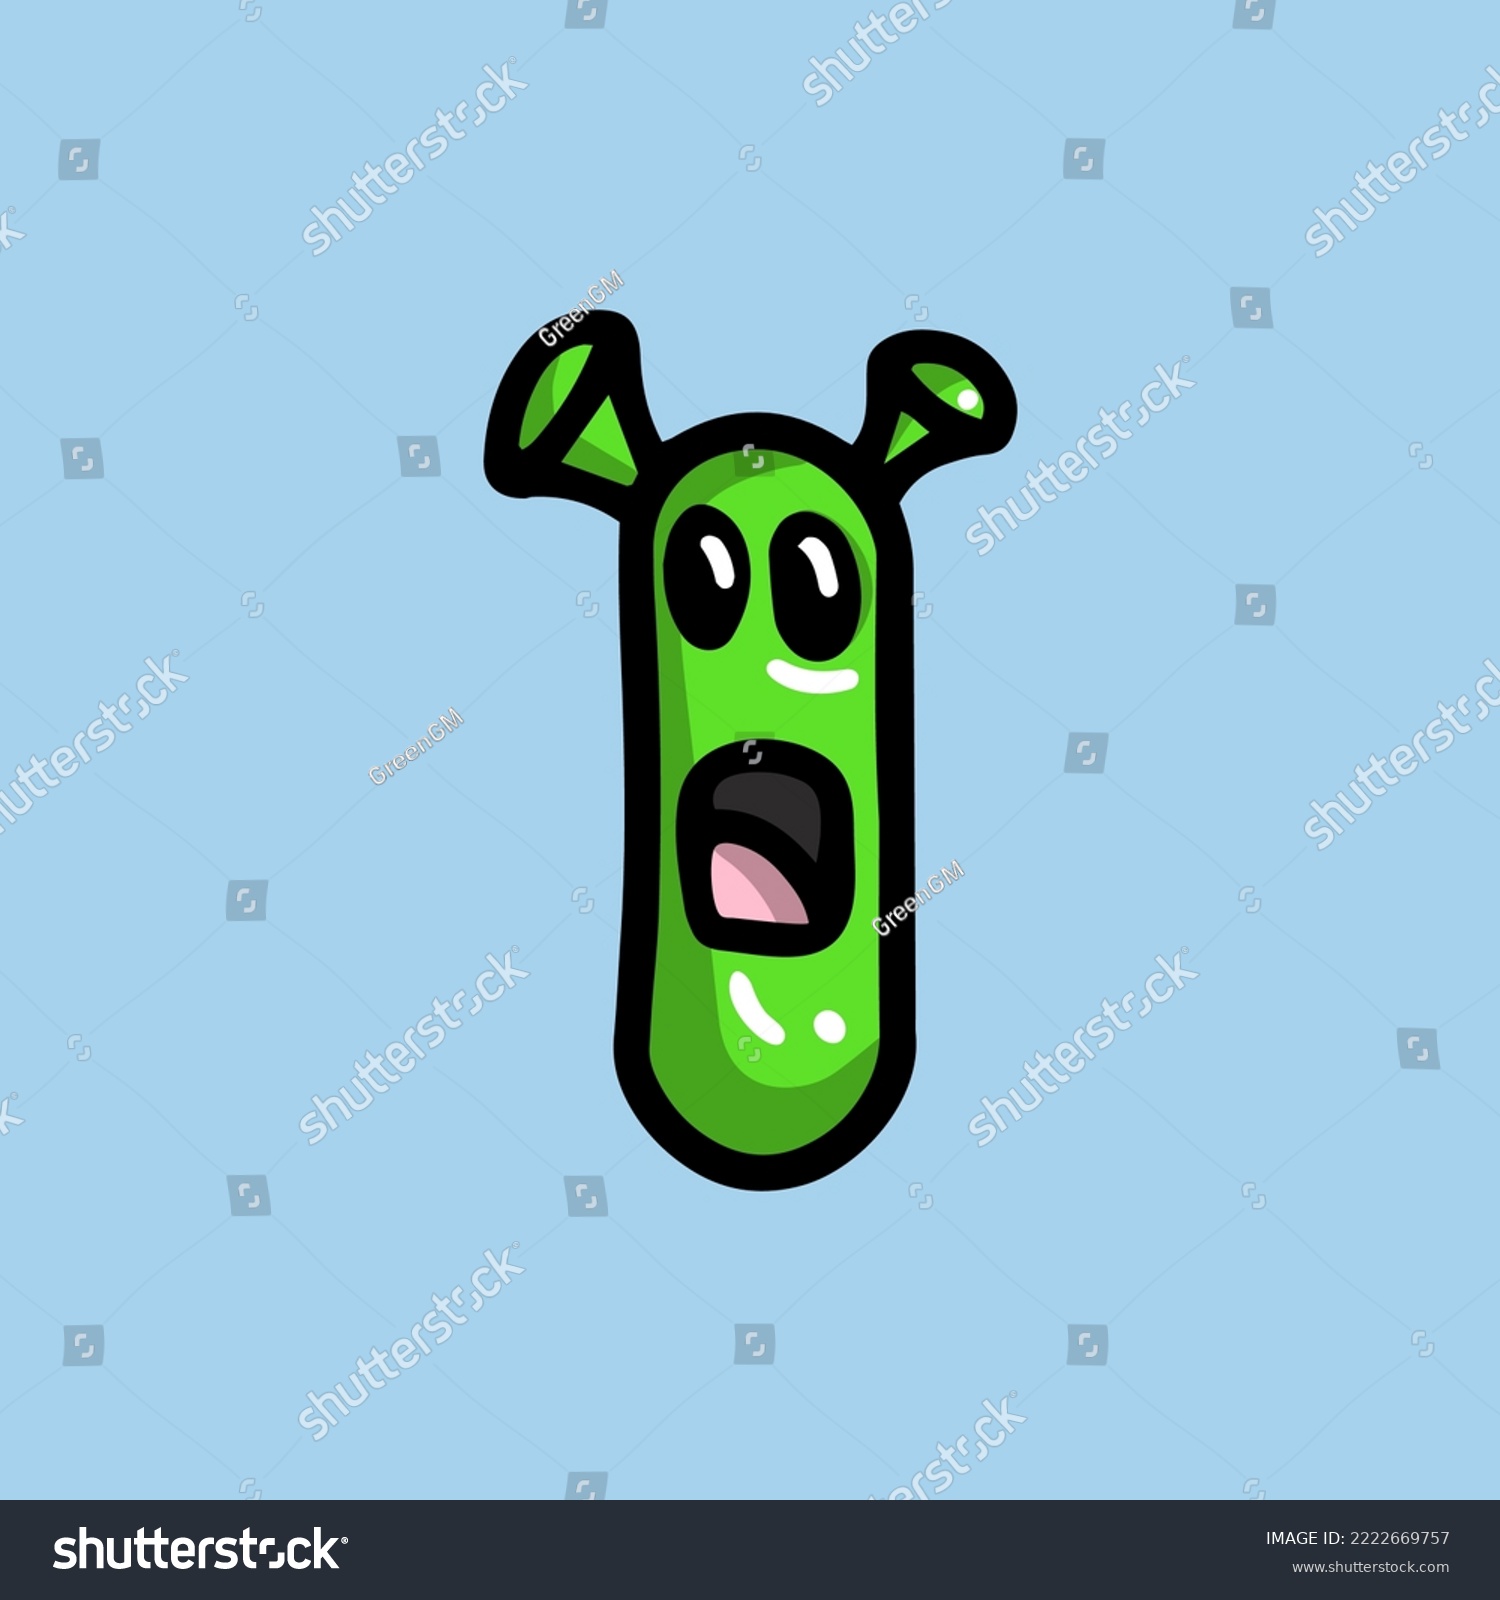 SVG of green funny letter I in the form of a Shrek monster with a face, ears and tongue, perplexed indignant playful and surprised frightened, with shadow and highlights, doodle svg